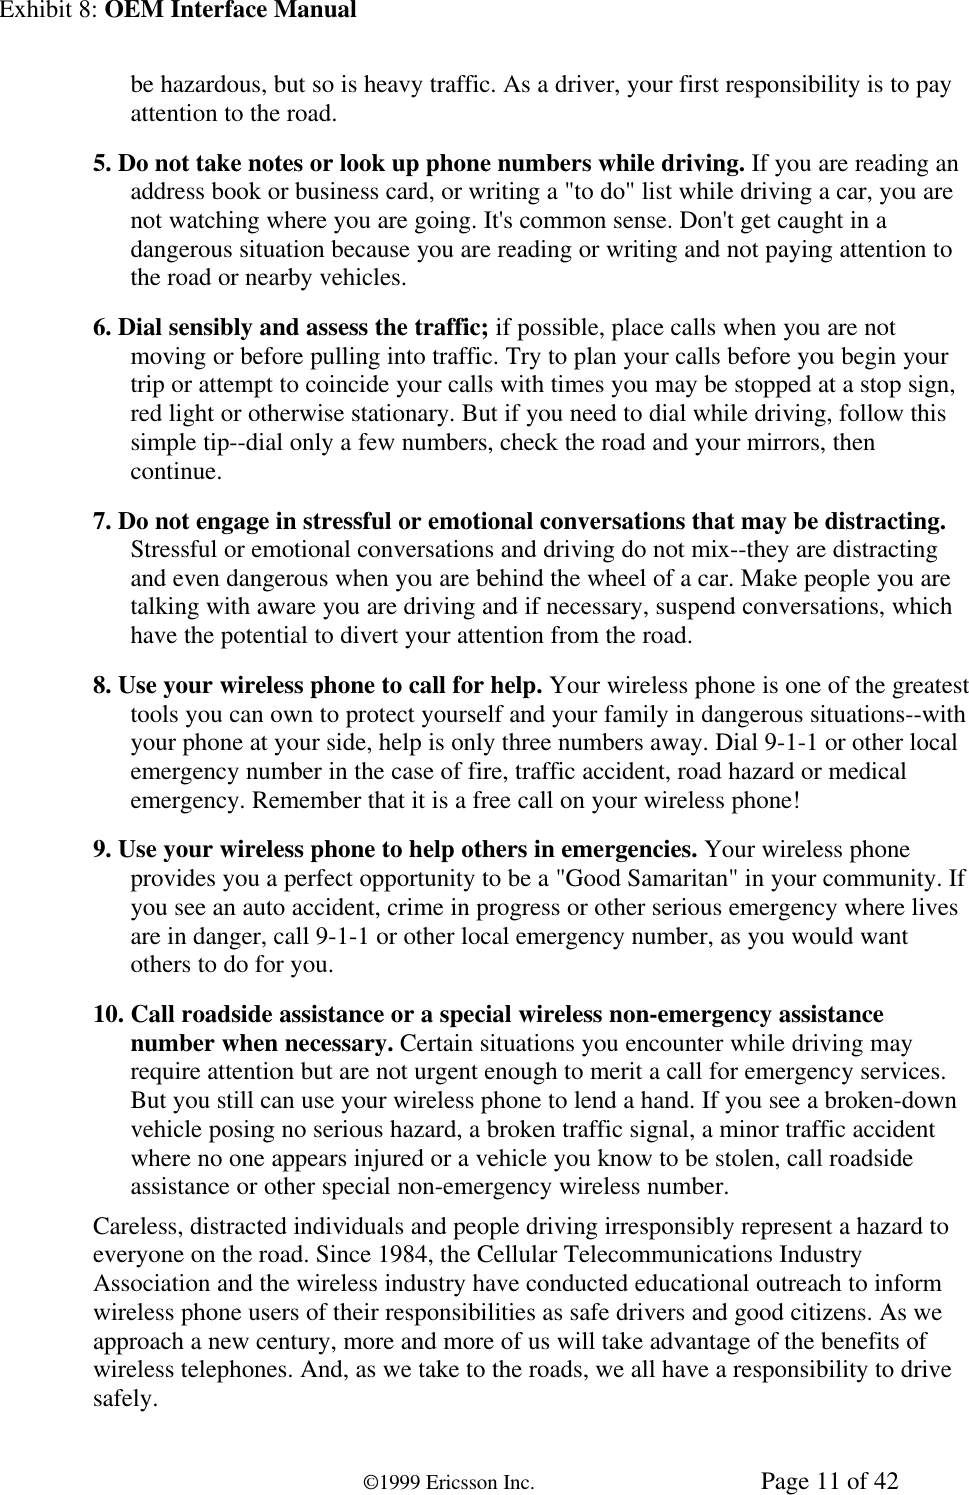 Exhibit 8: OEM Interface Manual©1999 Ericsson Inc. Page 11 of 42be hazardous, but so is heavy traffic. As a driver, your first responsibility is to payattention to the road.5. Do not take notes or look up phone numbers while driving. If you are reading anaddress book or business card, or writing a &quot;to do&quot; list while driving a car, you arenot watching where you are going. It&apos;s common sense. Don&apos;t get caught in adangerous situation because you are reading or writing and not paying attention tothe road or nearby vehicles.6. Dial sensibly and assess the traffic; if possible, place calls when you are notmoving or before pulling into traffic. Try to plan your calls before you begin yourtrip or attempt to coincide your calls with times you may be stopped at a stop sign,red light or otherwise stationary. But if you need to dial while driving, follow thissimple tip--dial only a few numbers, check the road and your mirrors, thencontinue.7. Do not engage in stressful or emotional conversations that may be distracting.Stressful or emotional conversations and driving do not mix--they are distractingand even dangerous when you are behind the wheel of a car. Make people you aretalking with aware you are driving and if necessary, suspend conversations, whichhave the potential to divert your attention from the road.8. Use your wireless phone to call for help. Your wireless phone is one of the greatesttools you can own to protect yourself and your family in dangerous situations--withyour phone at your side, help is only three numbers away. Dial 9-1-1 or other localemergency number in the case of fire, traffic accident, road hazard or medicalemergency. Remember that it is a free call on your wireless phone!9. Use your wireless phone to help others in emergencies. Your wireless phoneprovides you a perfect opportunity to be a &quot;Good Samaritan&quot; in your community. Ifyou see an auto accident, crime in progress or other serious emergency where livesare in danger, call 9-1-1 or other local emergency number, as you would wantothers to do for you.10. Call roadside assistance or a special wireless non-emergency assistancenumber when necessary. Certain situations you encounter while driving mayrequire attention but are not urgent enough to merit a call for emergency services.But you still can use your wireless phone to lend a hand. If you see a broken-downvehicle posing no serious hazard, a broken traffic signal, a minor traffic accidentwhere no one appears injured or a vehicle you know to be stolen, call roadsideassistance or other special non-emergency wireless number.Careless, distracted individuals and people driving irresponsibly represent a hazard toeveryone on the road. Since 1984, the Cellular Telecommunications IndustryAssociation and the wireless industry have conducted educational outreach to informwireless phone users of their responsibilities as safe drivers and good citizens. As weapproach a new century, more and more of us will take advantage of the benefits ofwireless telephones. And, as we take to the roads, we all have a responsibility to drivesafely.